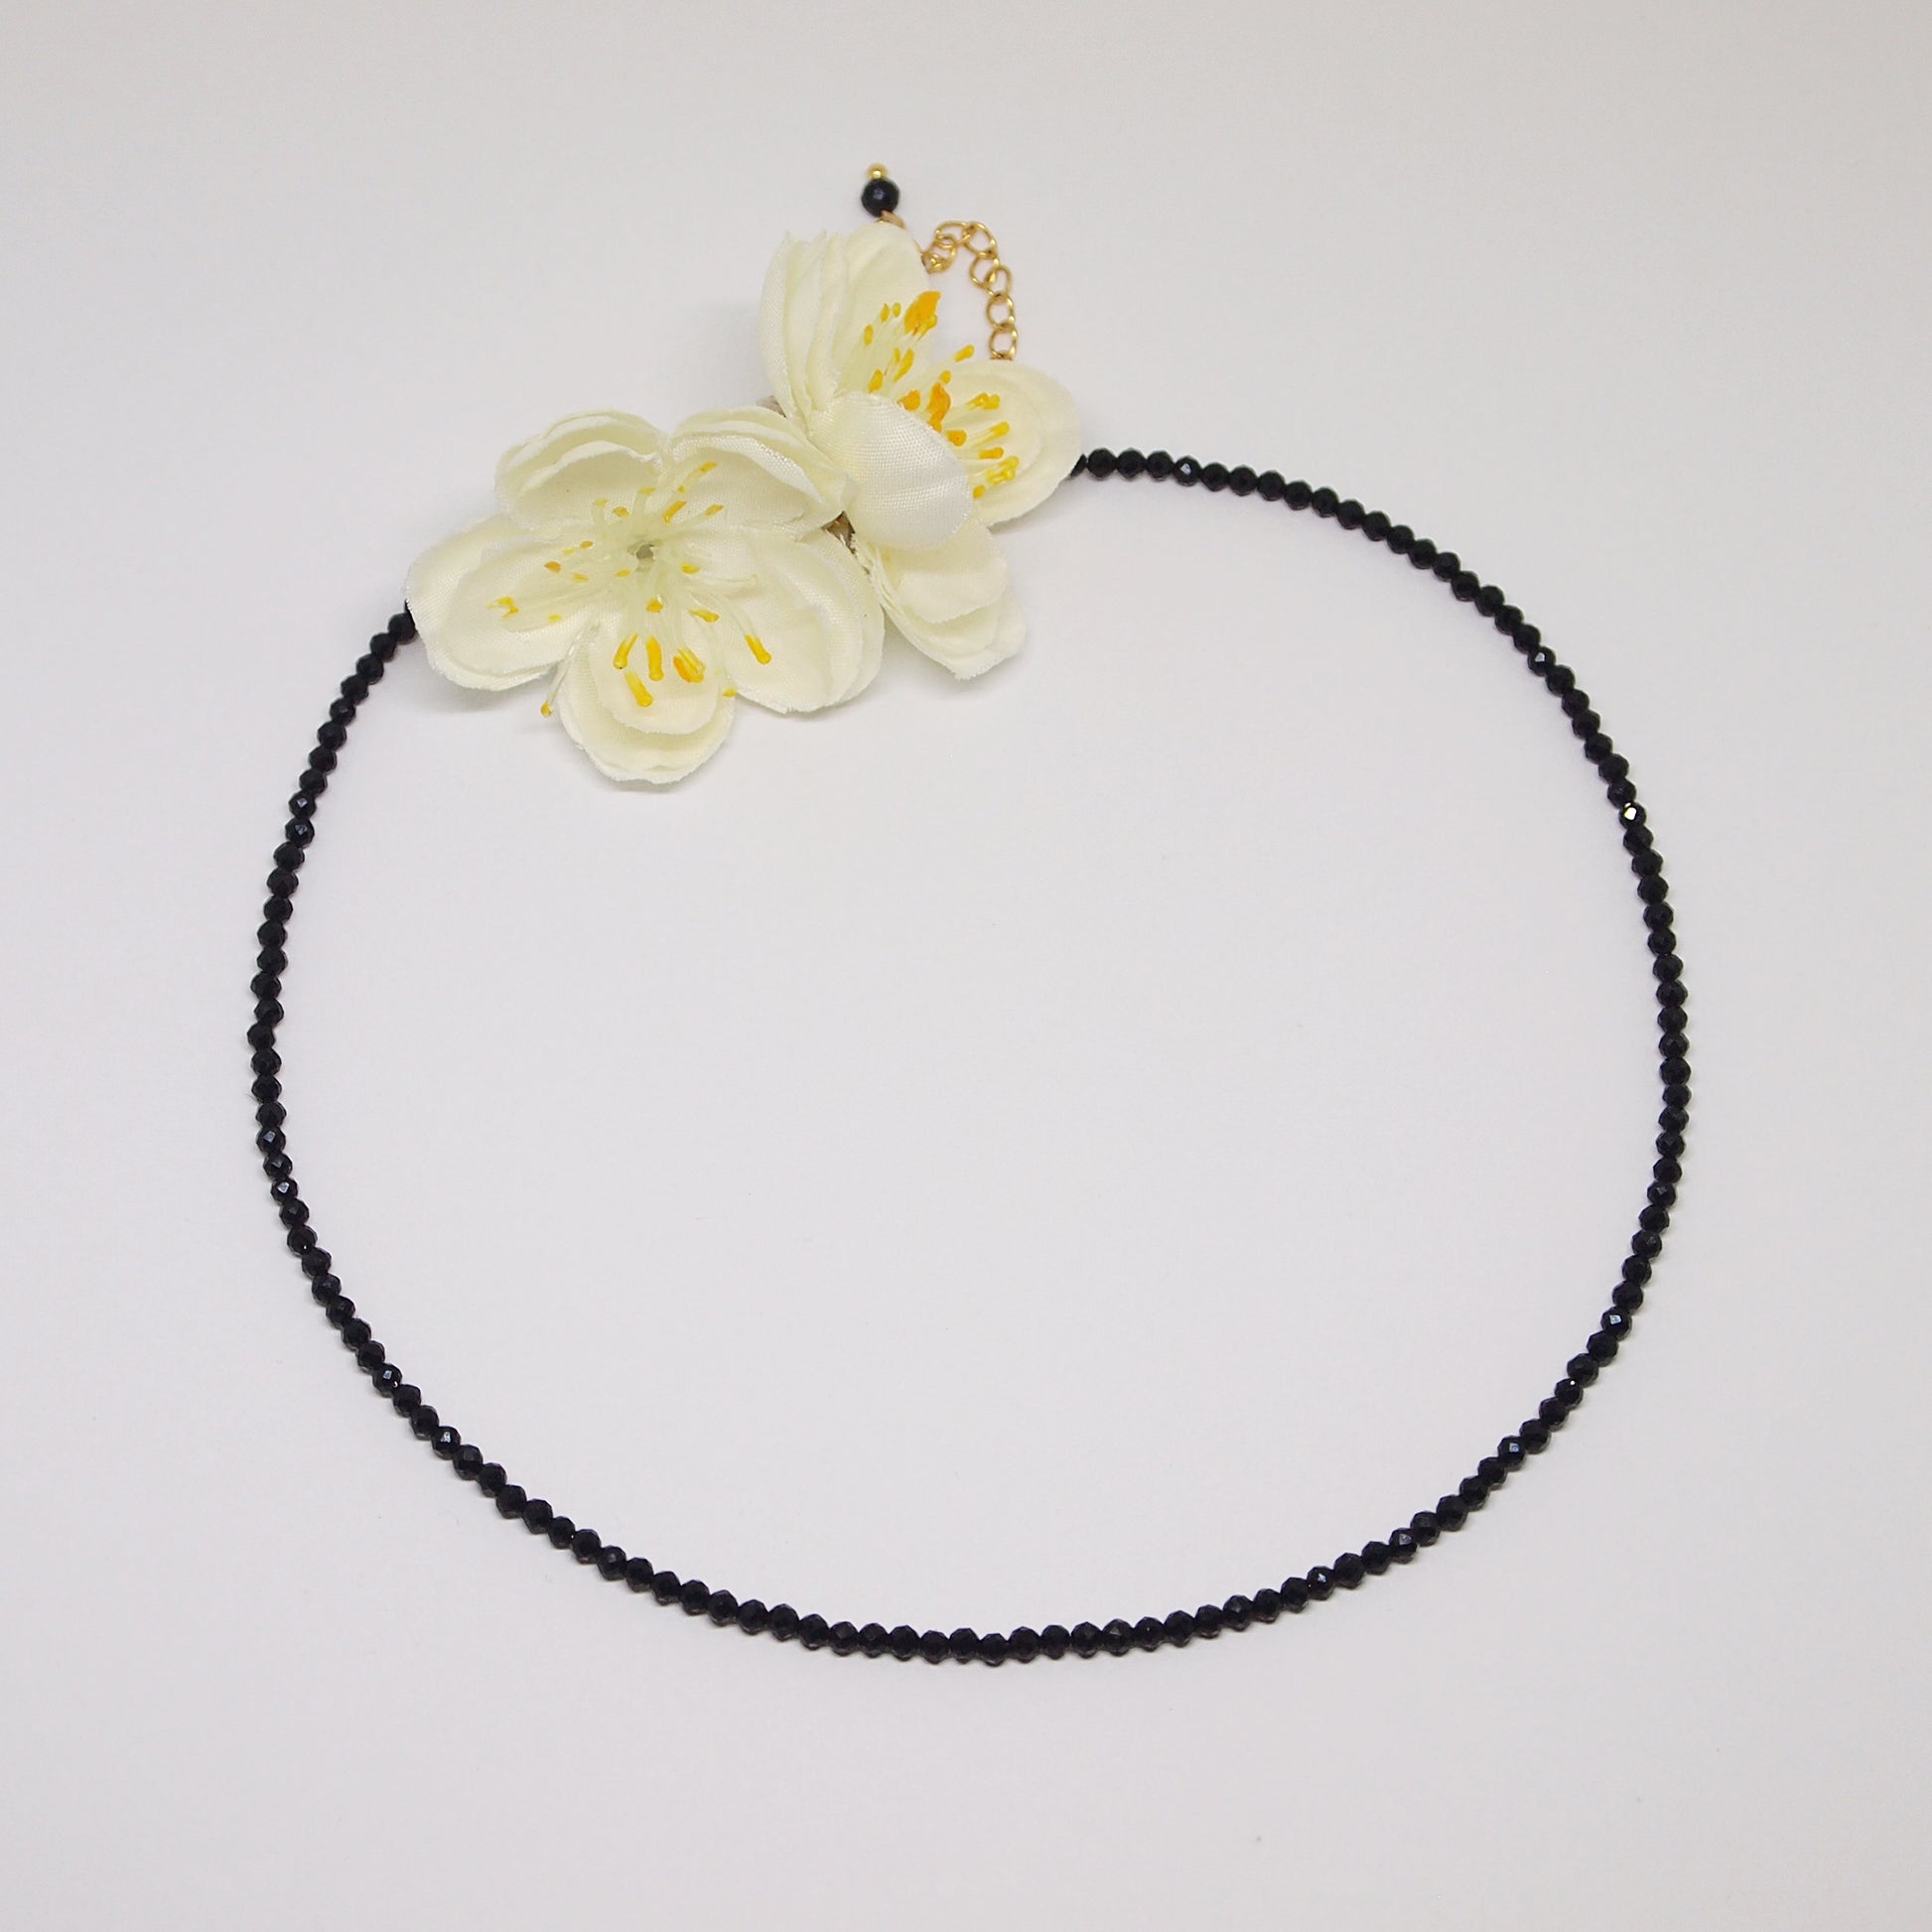 very delicate black tourmaline necklace, perfect for layering